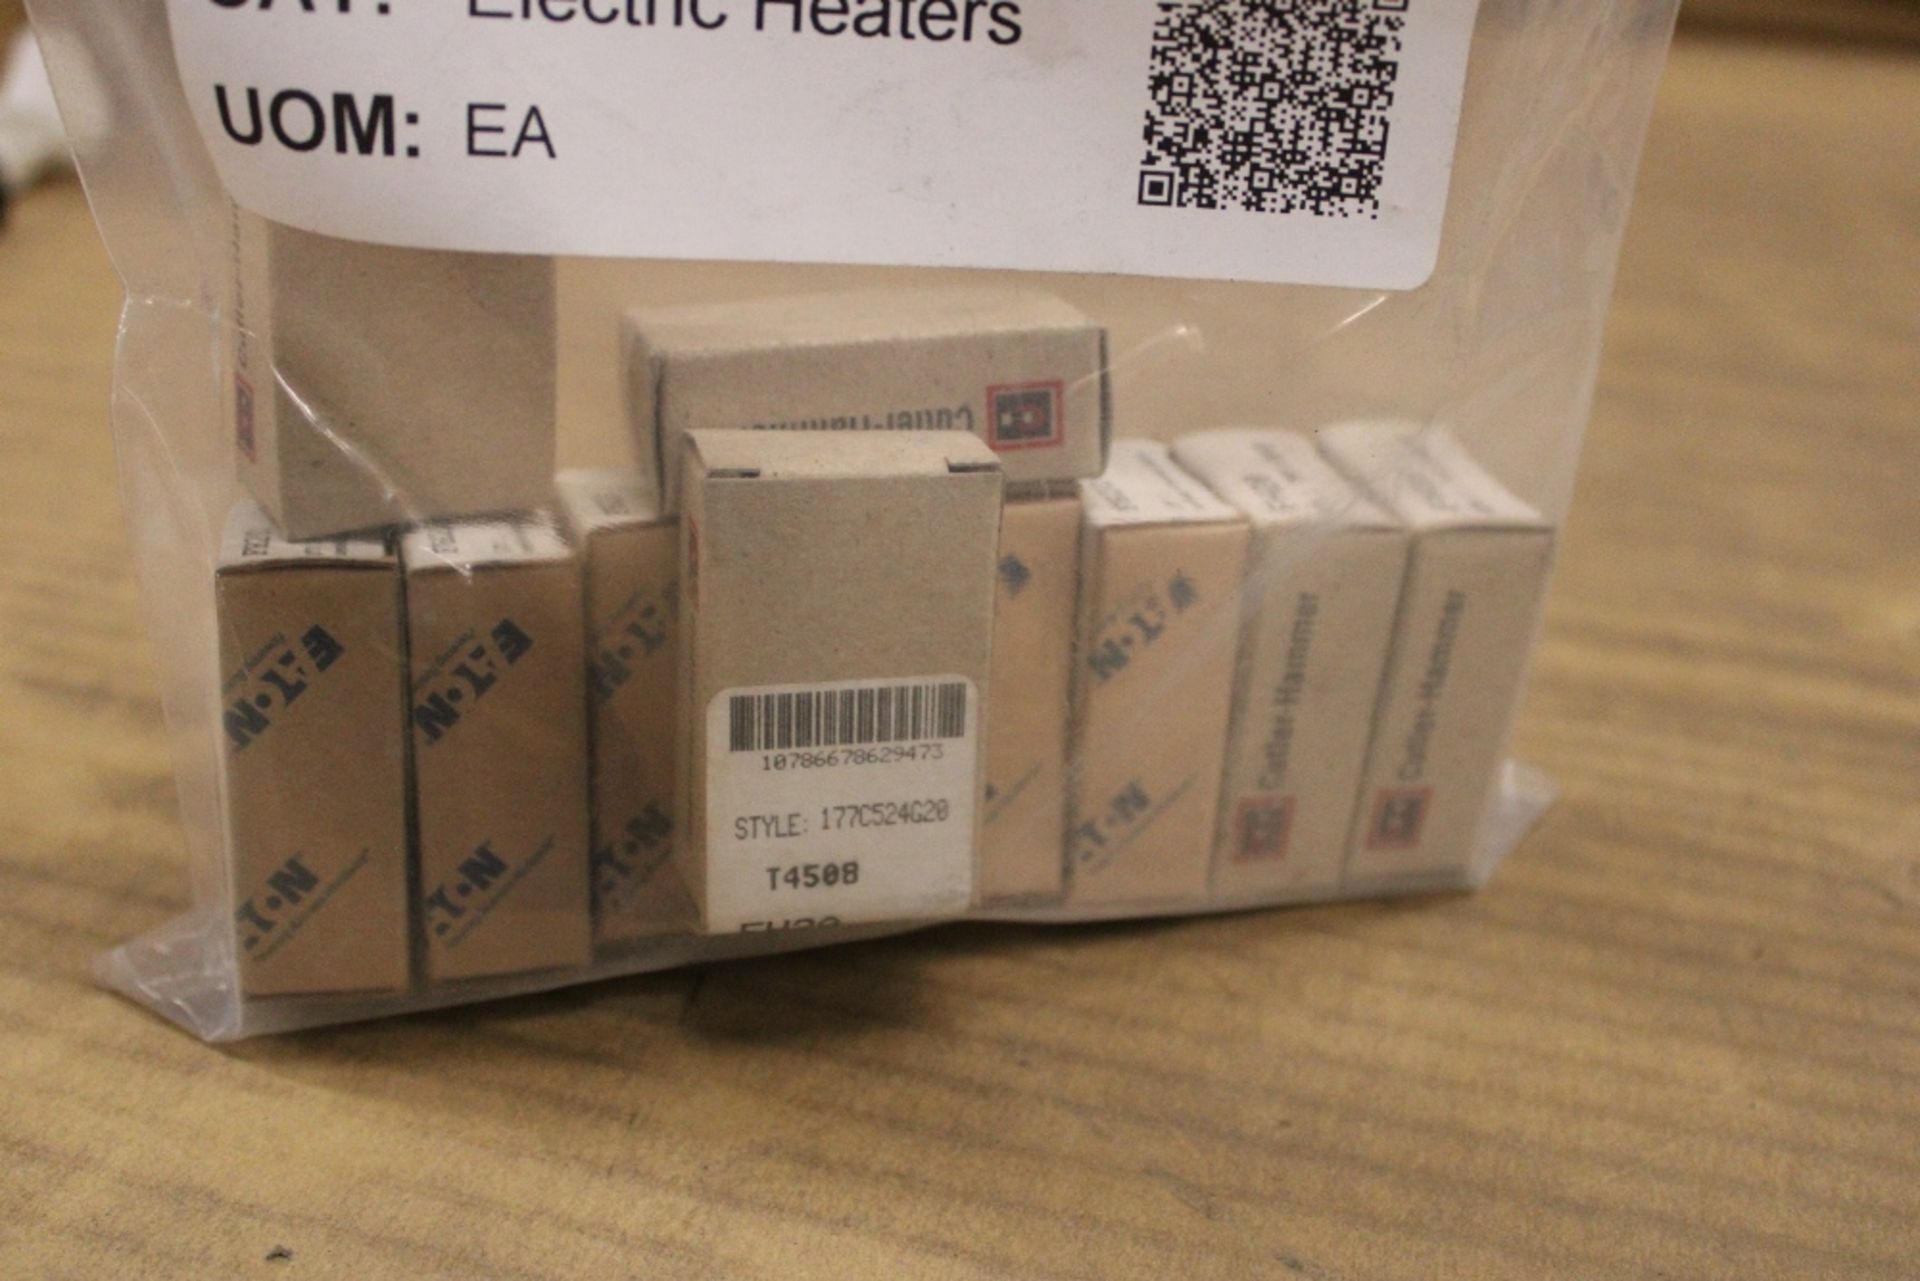 12x Eaton FH20 Heater Packs and Elements 1.71A - Image 2 of 2